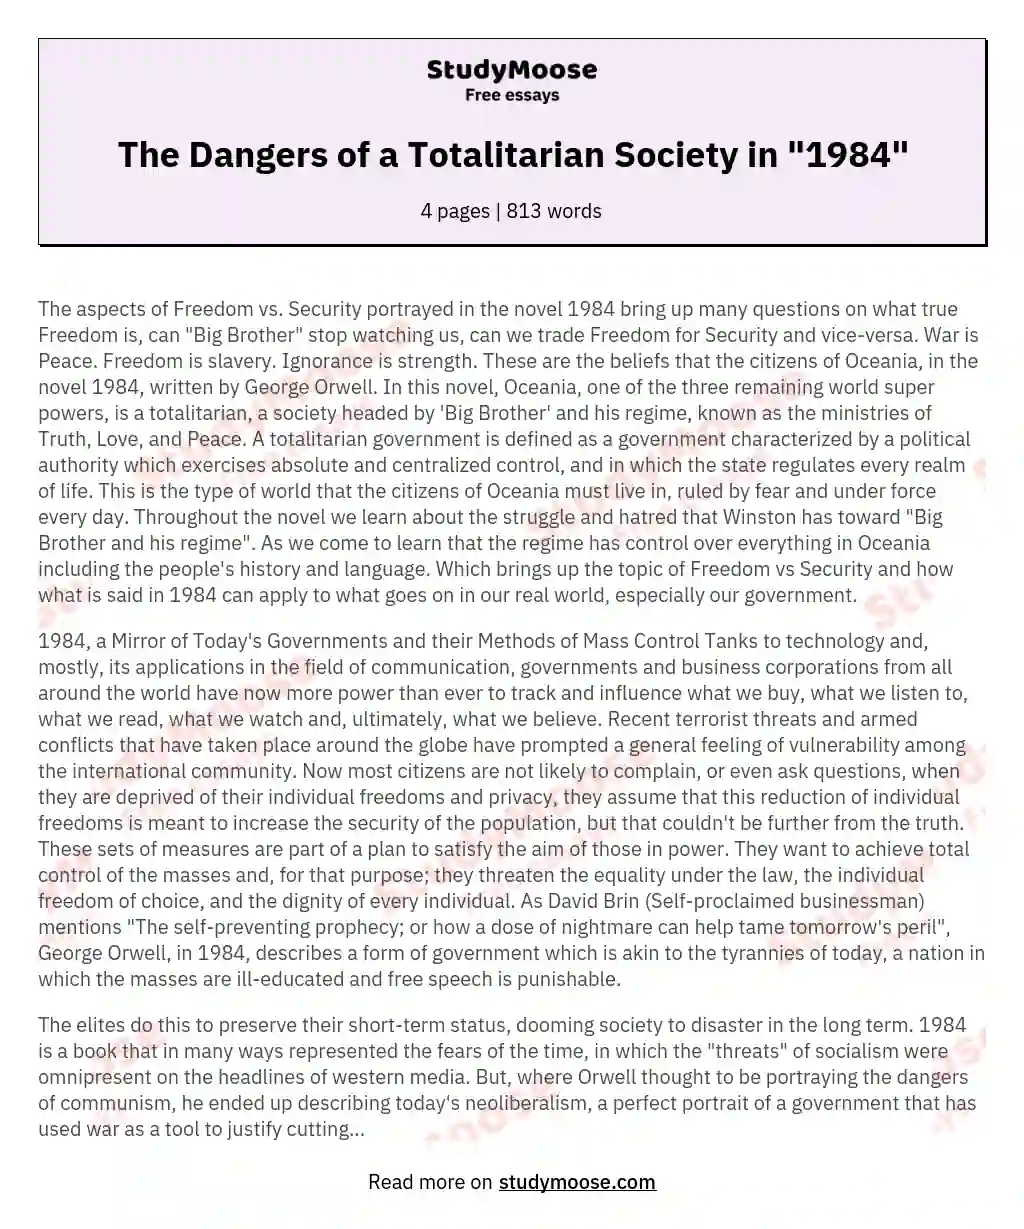 The Dangers of a Totalitarian Society in "1984" essay